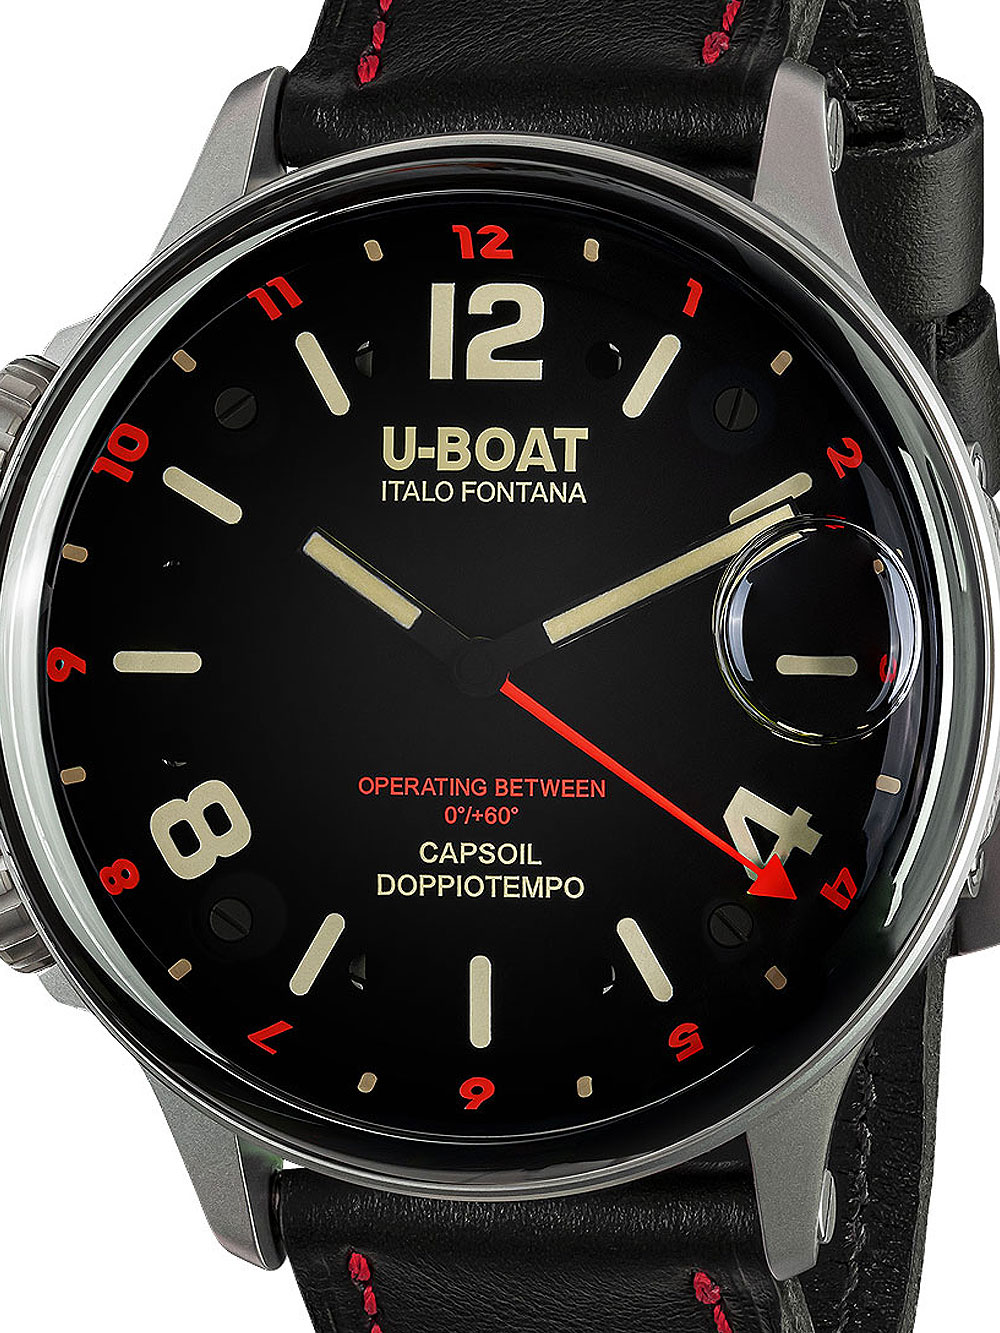 U-Boat 9674 Capsoil Doppiotempo SS GMT Mens Watch 55mm 10ATM BY U-BOAT - Wristwatch available at DOYUF